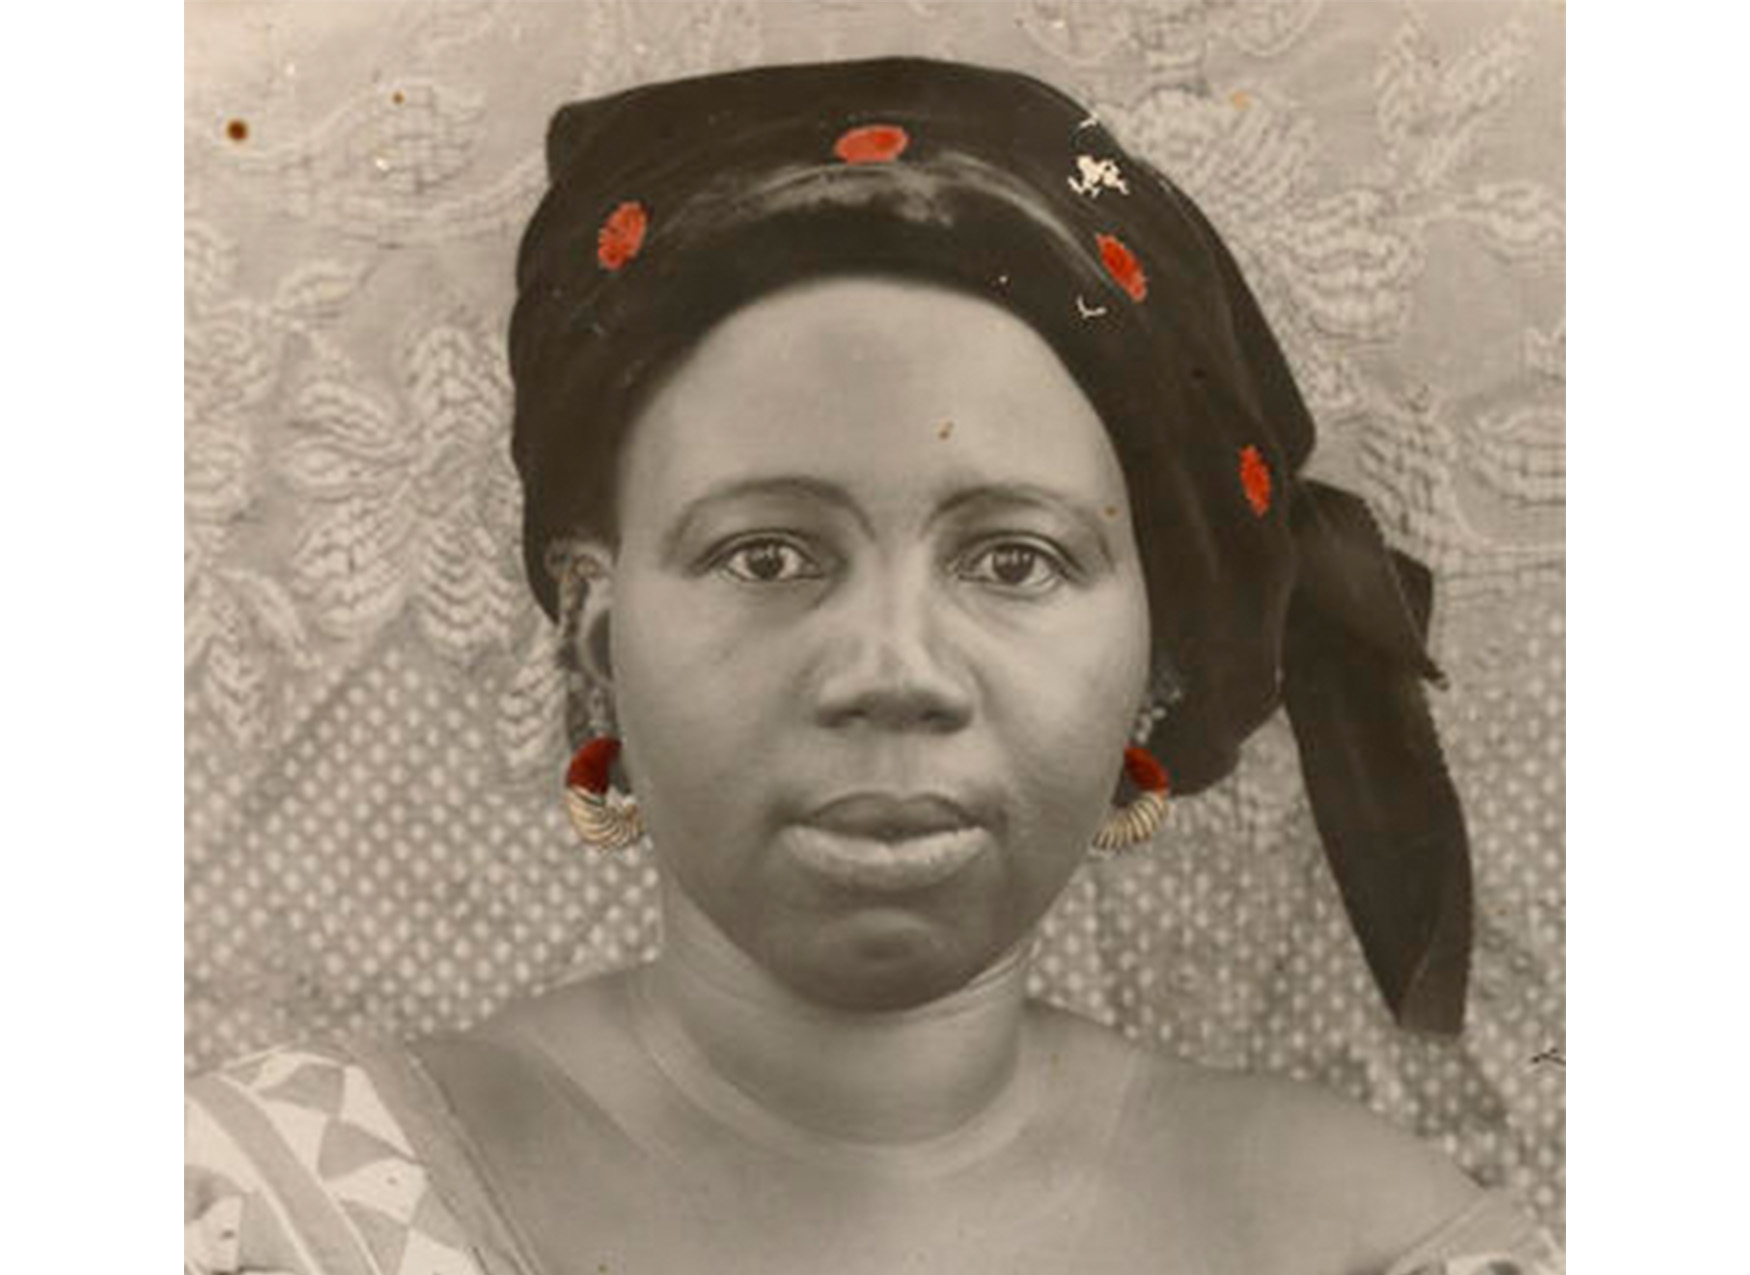 close-up of woman wearing black and red scarf on head, red earrings